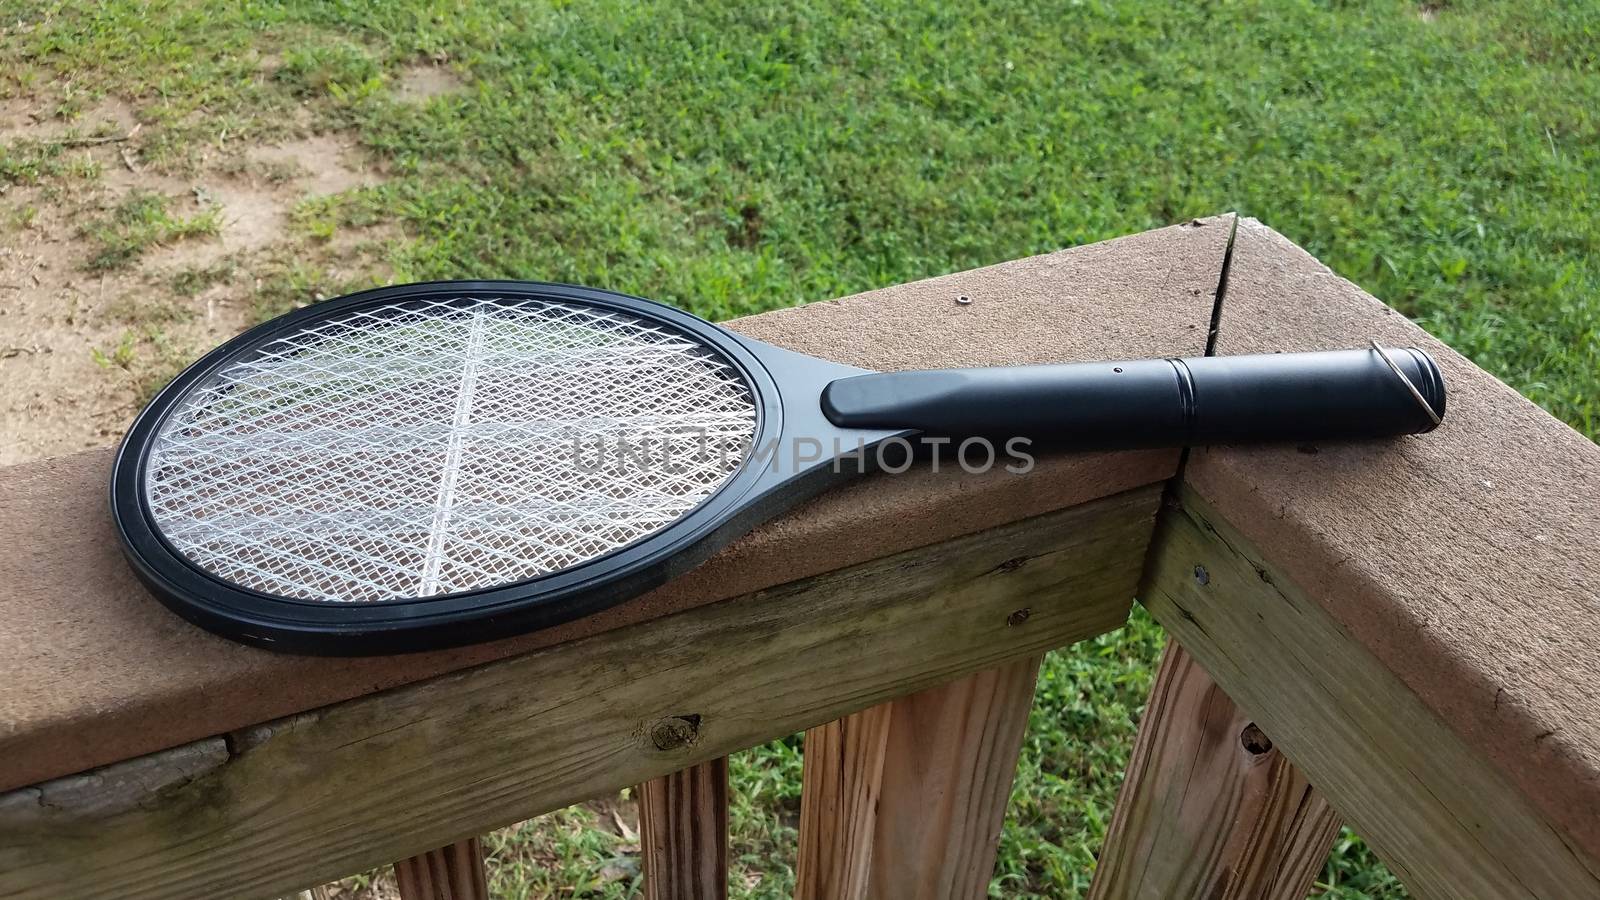 electronic metal tennis racket insect killer on wood railing by stockphotofan1